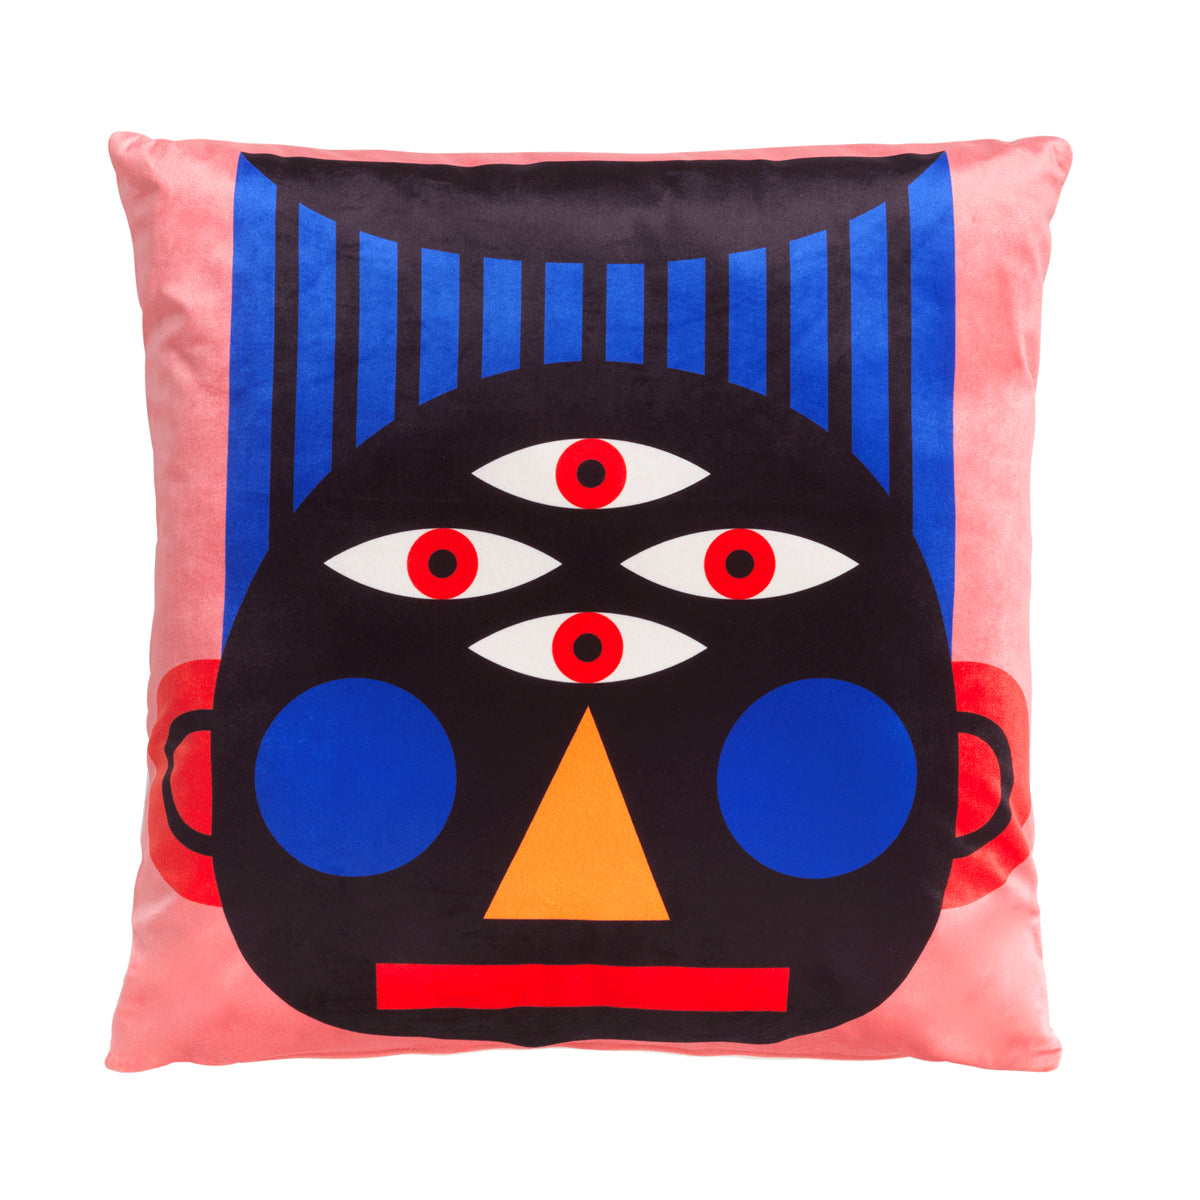 Oggian Face Cushion Cover by Marco Oggian